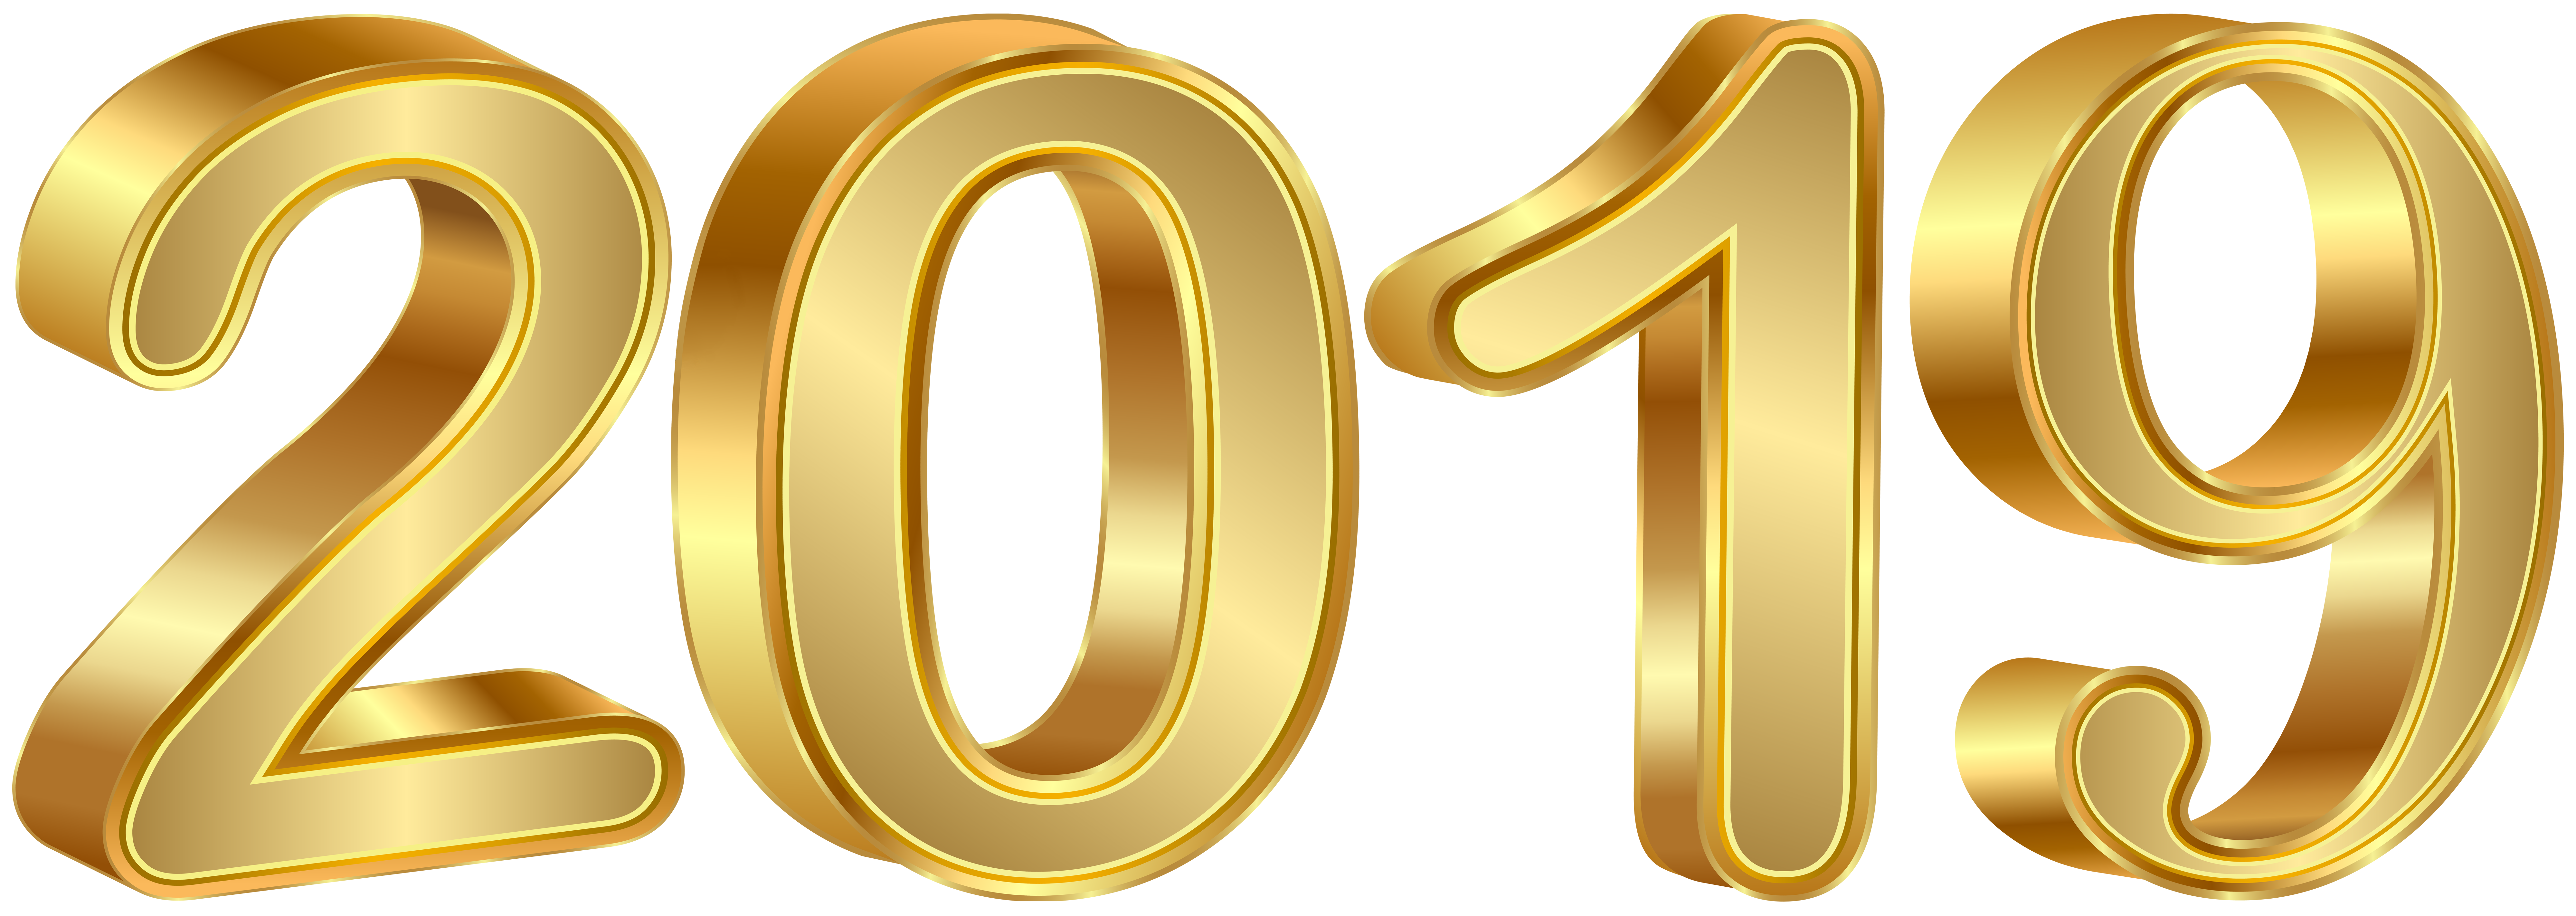 2019 Gold PNG Clipart Image.